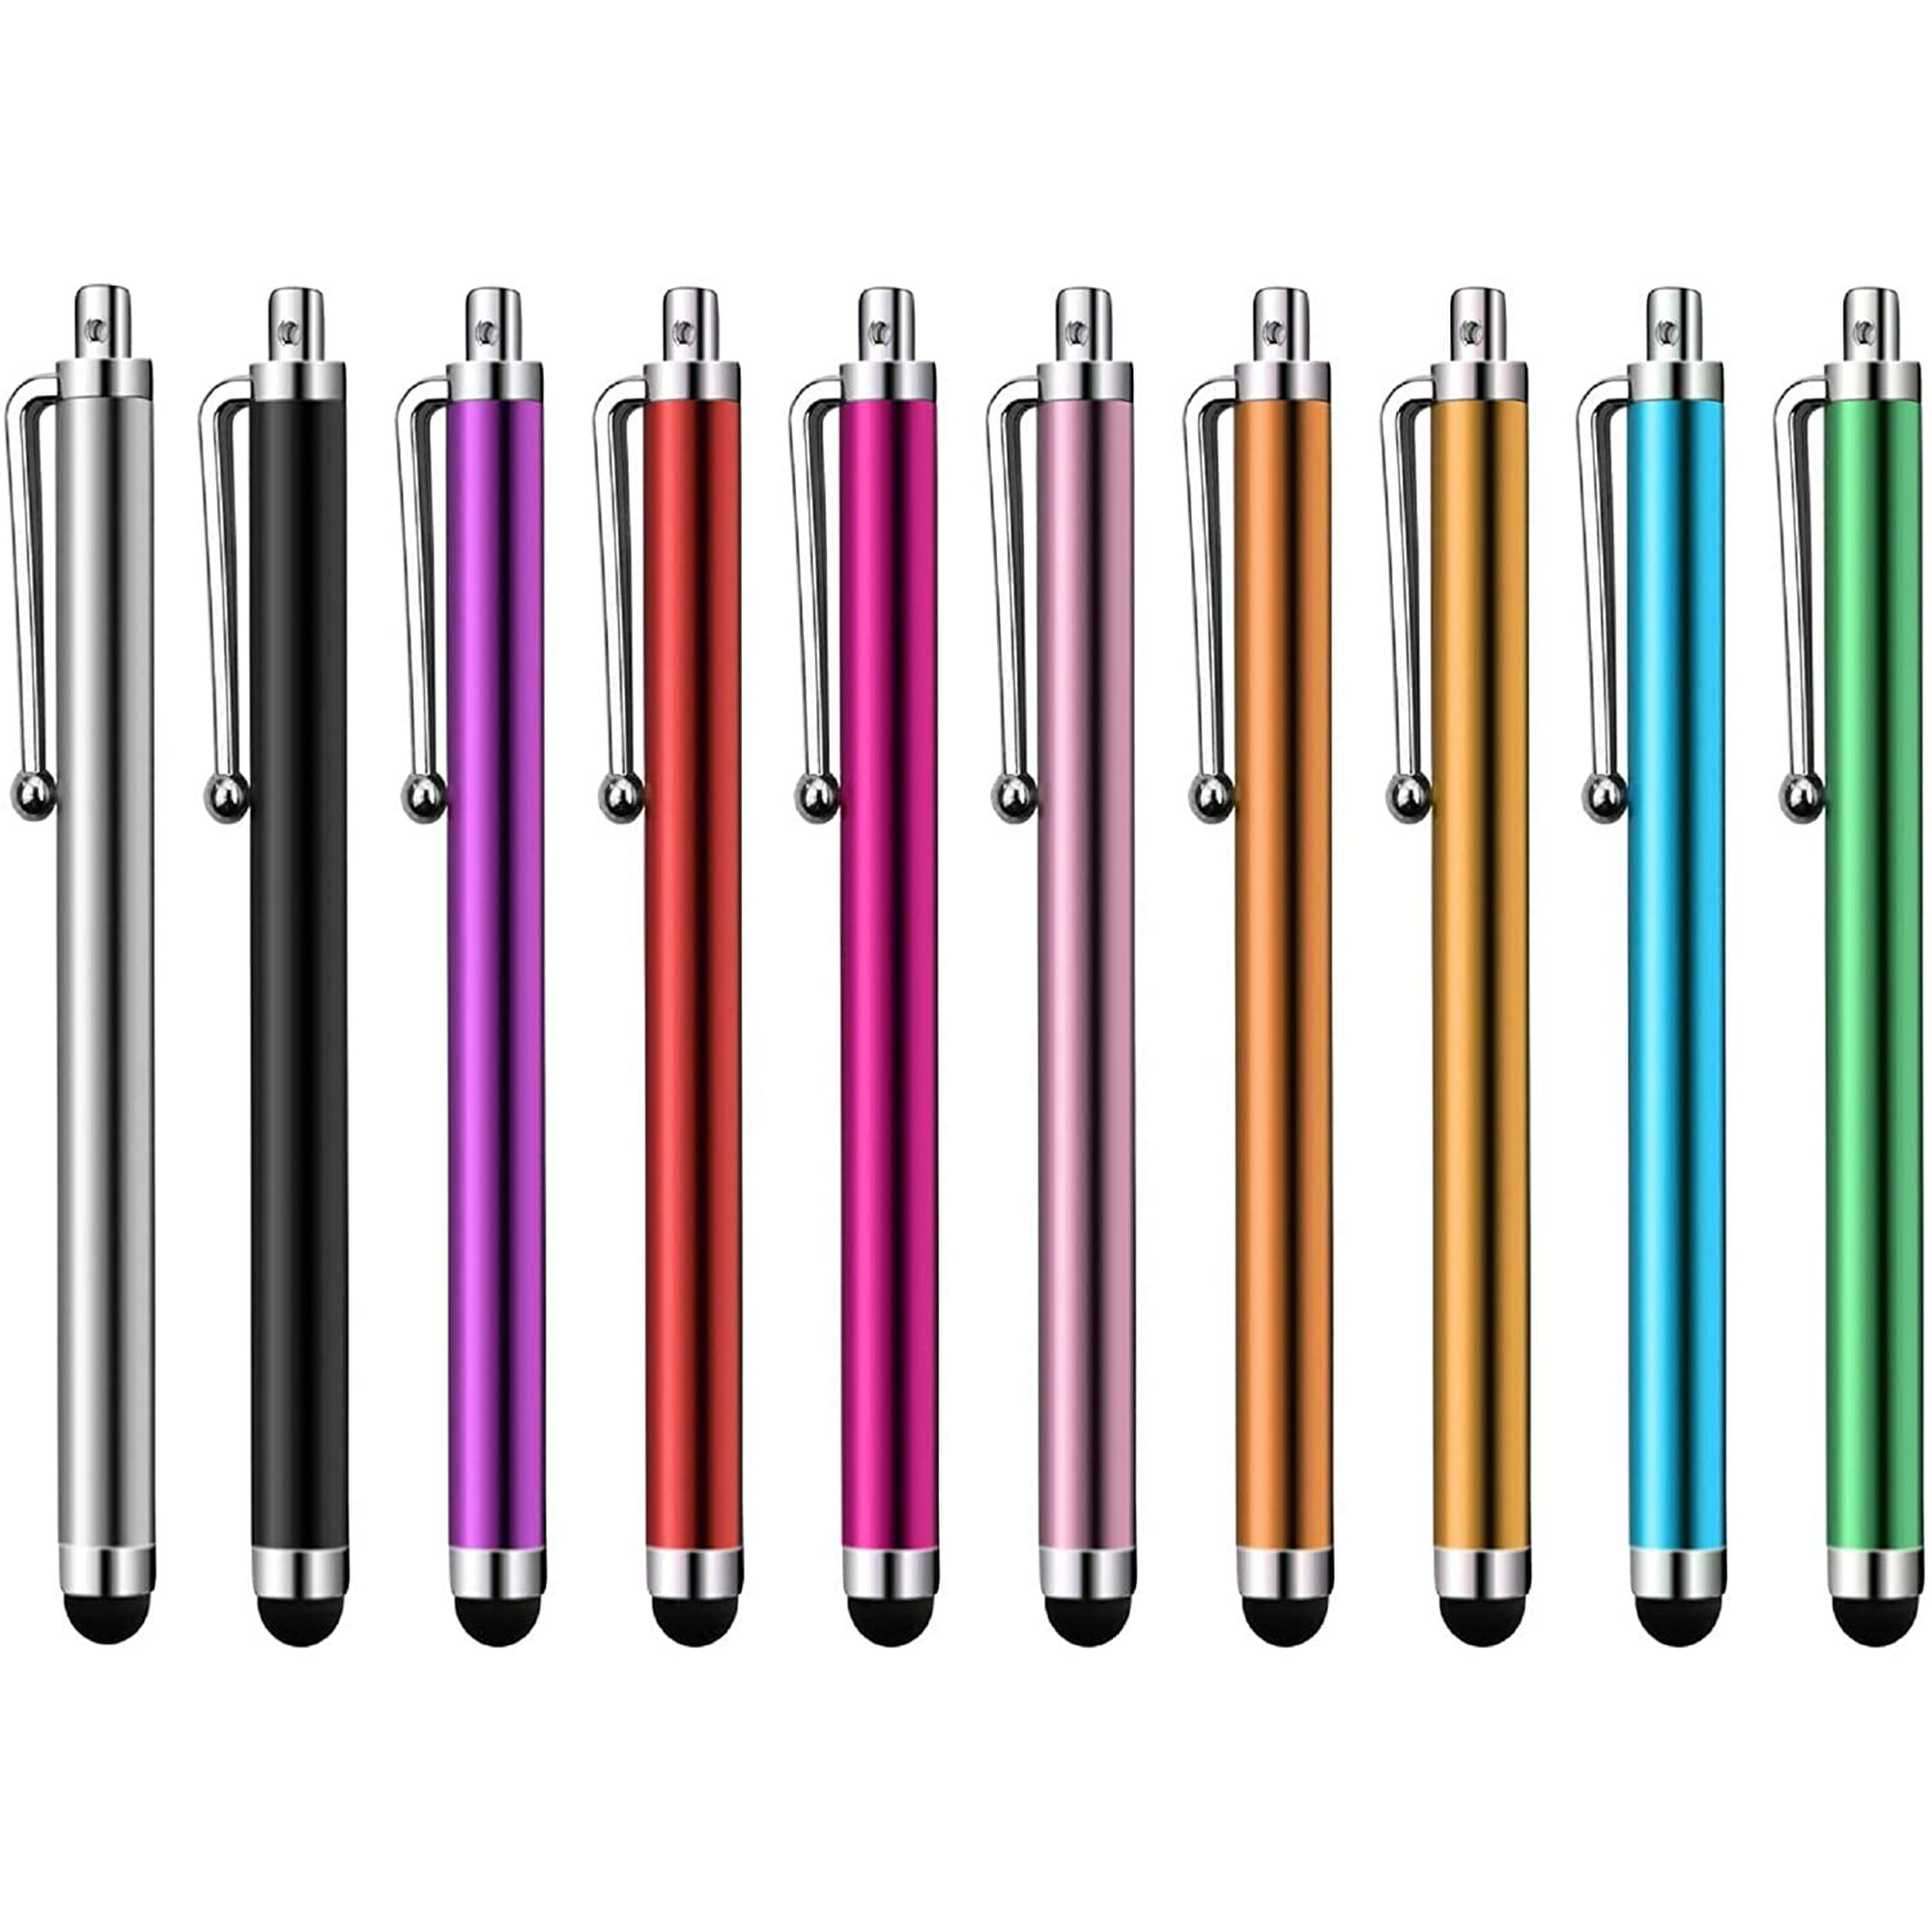 Mangle Kor nominelt 20 Pack Universal Capacitive Stylus Pen Portable Multicolor Touchscreen Stylus  Pens Compatible with Apple iPhone 5 /5S/ 5C /6/7/11 Plus iPad Galaxy Tablet  Smartphone PDA - Walmart.com